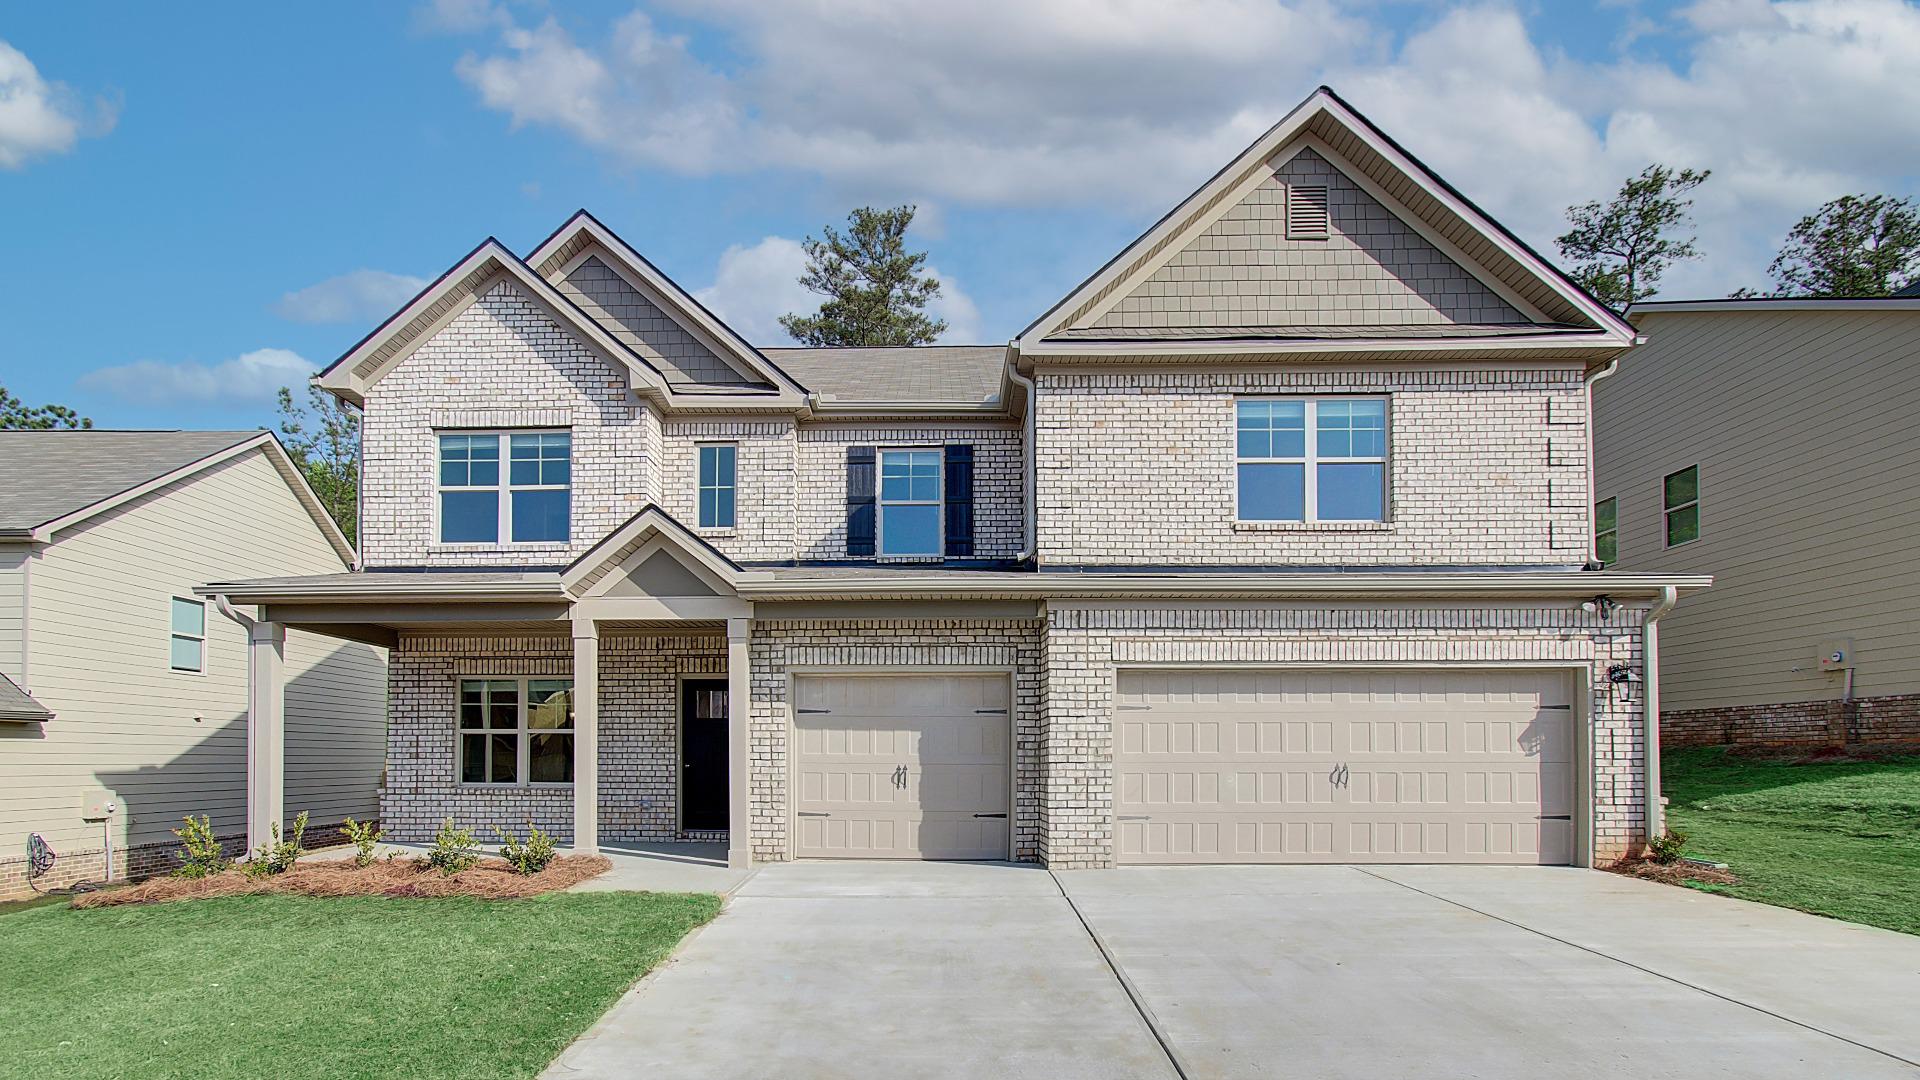 Tan brick two story home with 3 car garage in the DRB Homes Ridgewater community